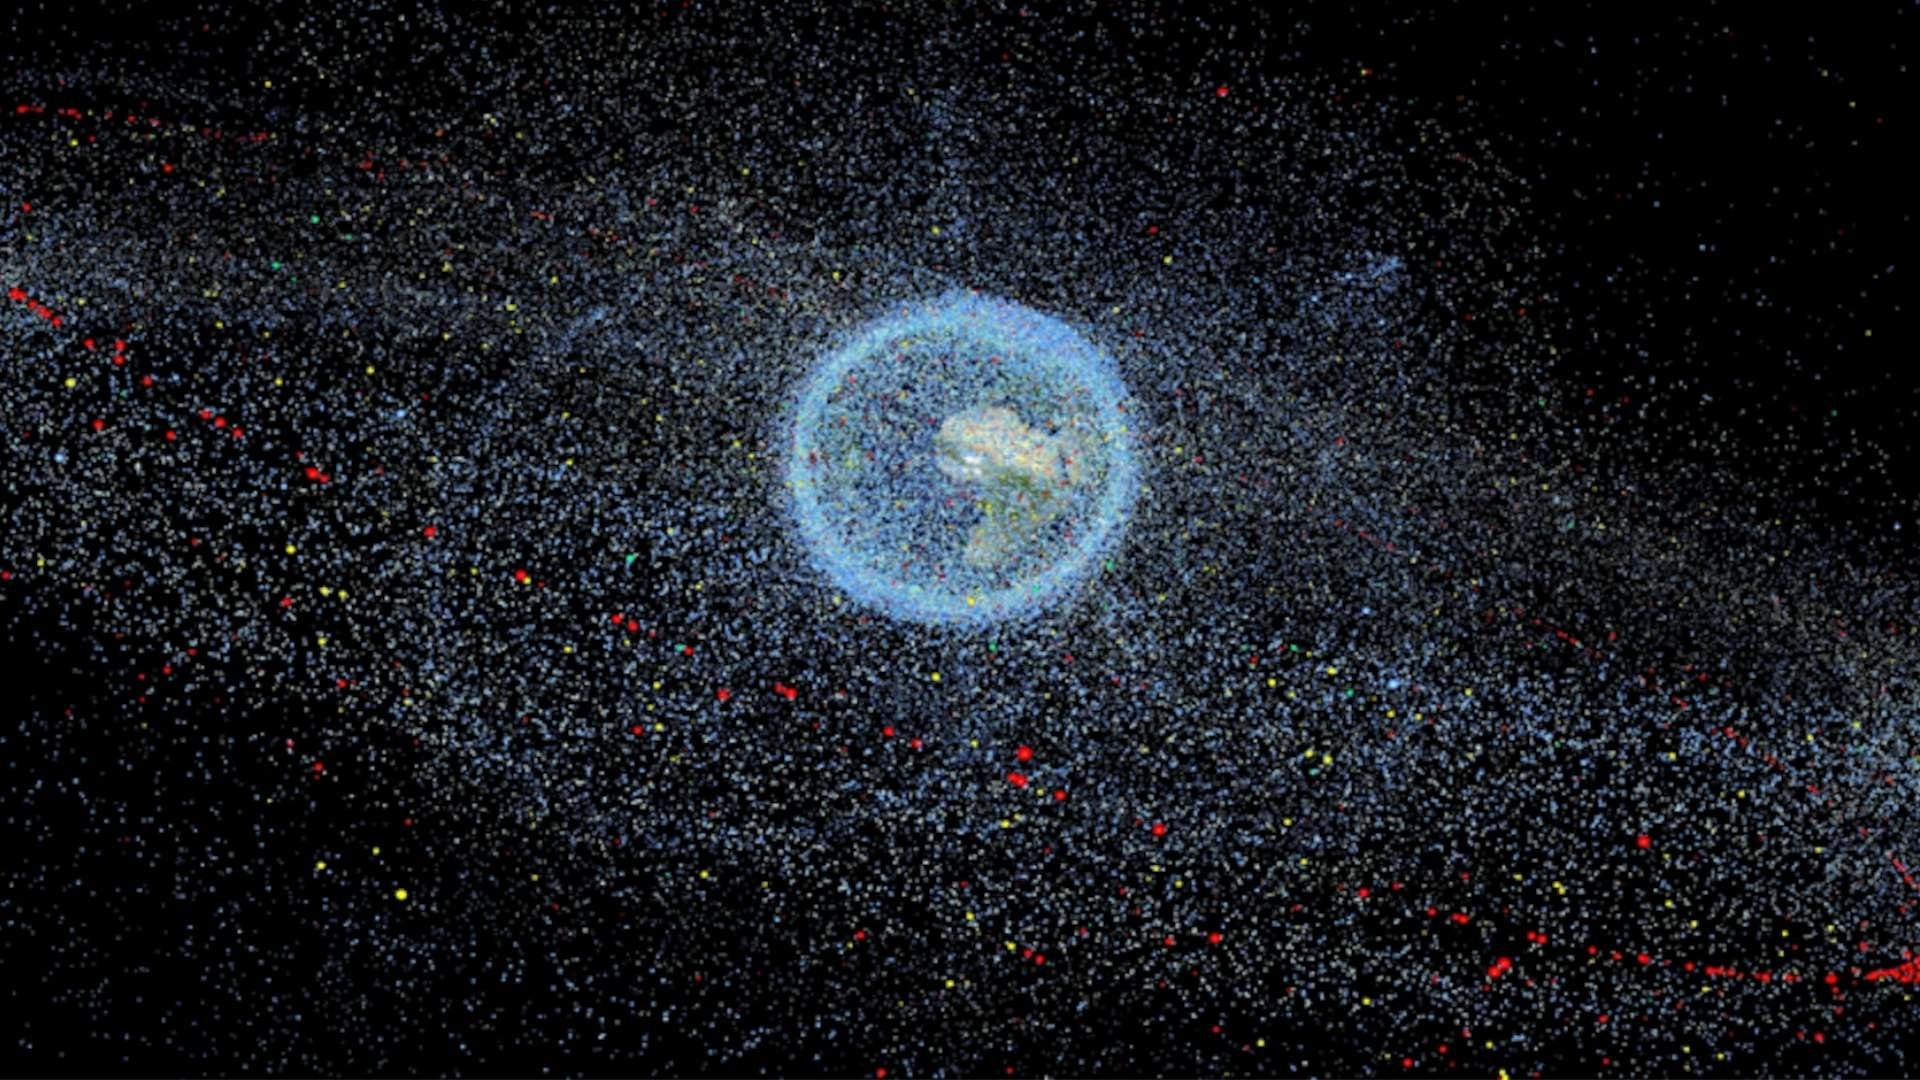 A graphic of space debris orbiting around the earth.